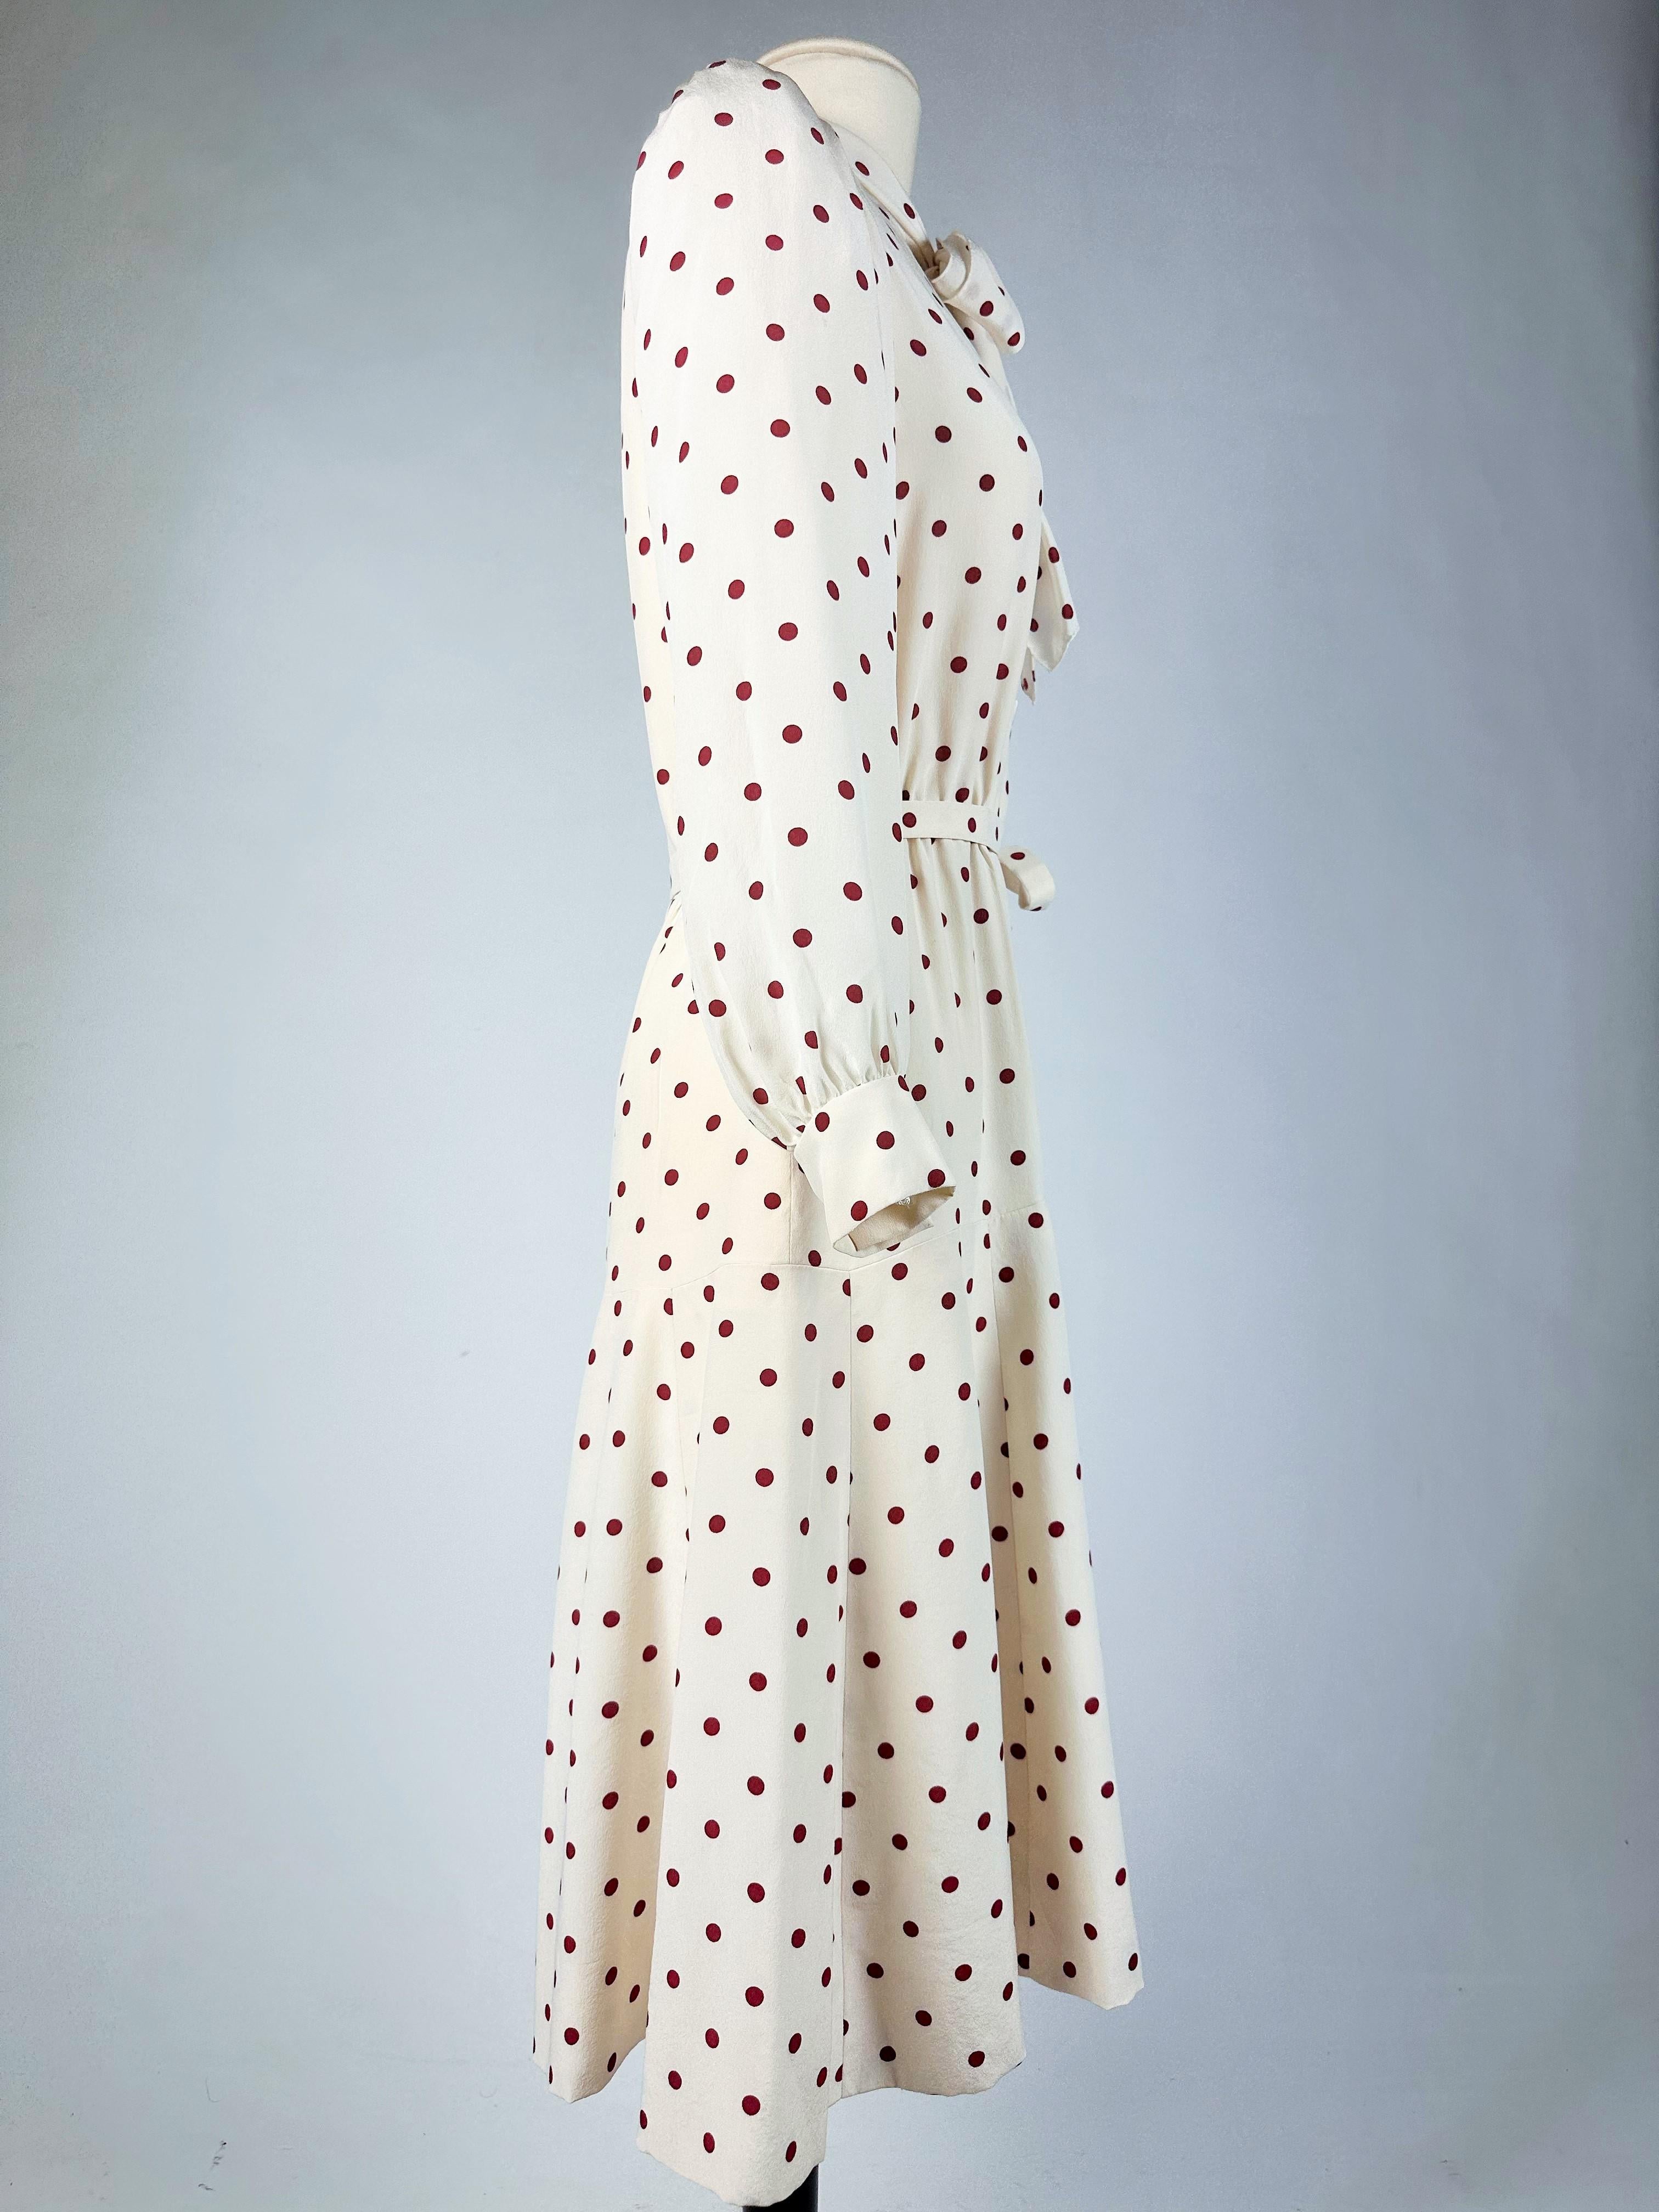 Women's A Polka Dots crepe cocktail dress by Chanel Haute Couture numbered 59644 C. 1975 For Sale